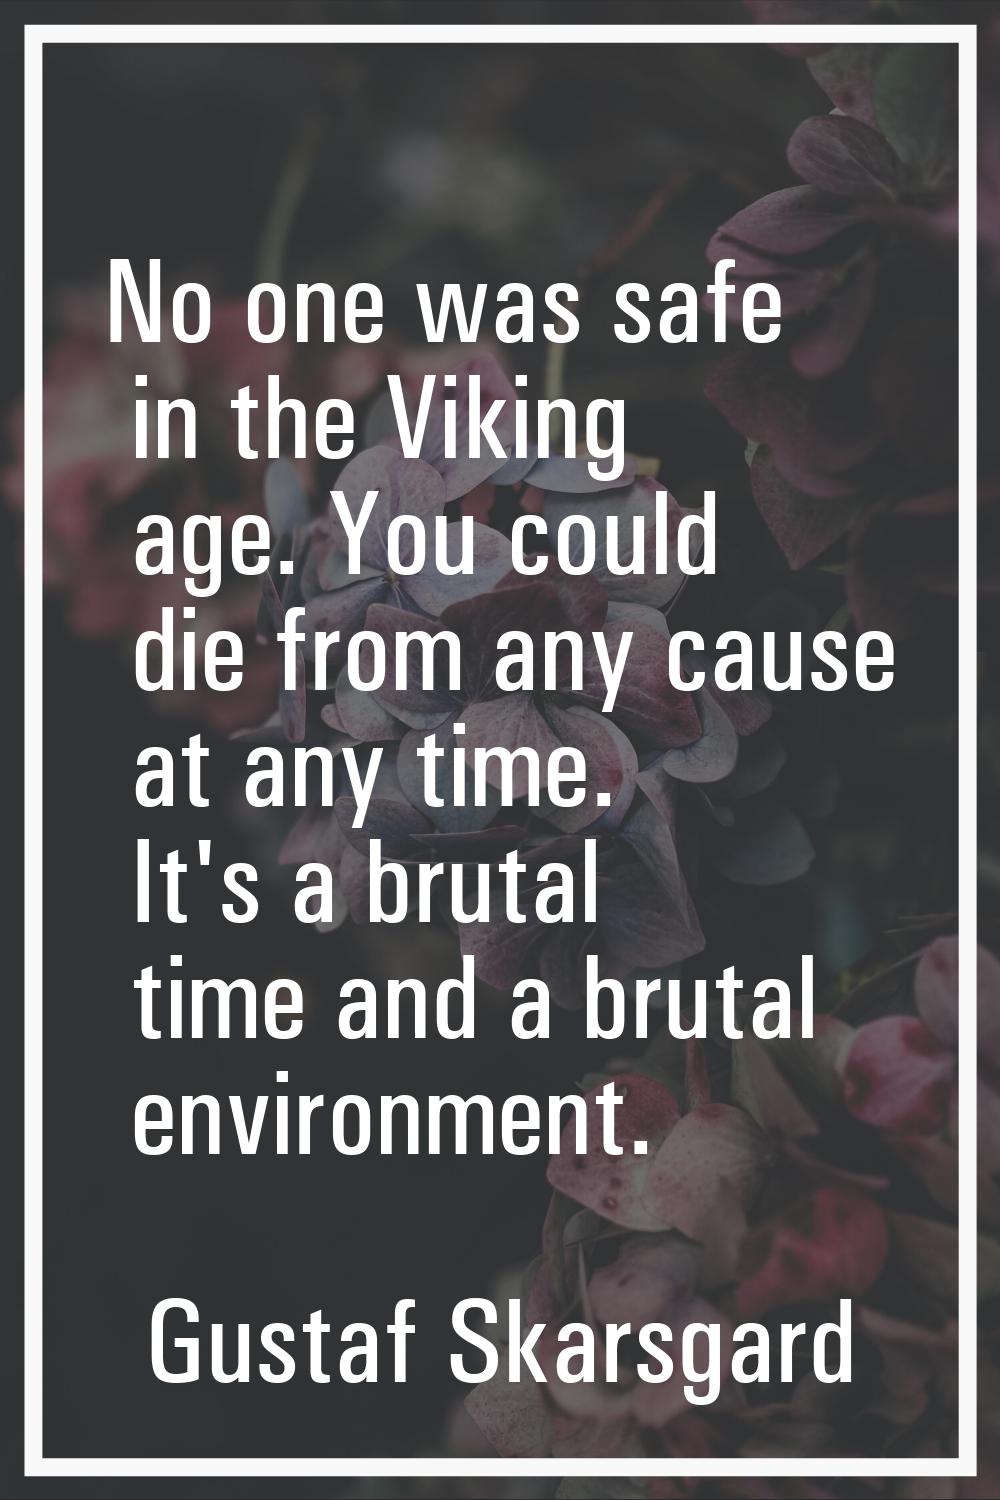 No one was safe in the Viking age. You could die from any cause at any time. It's a brutal time and